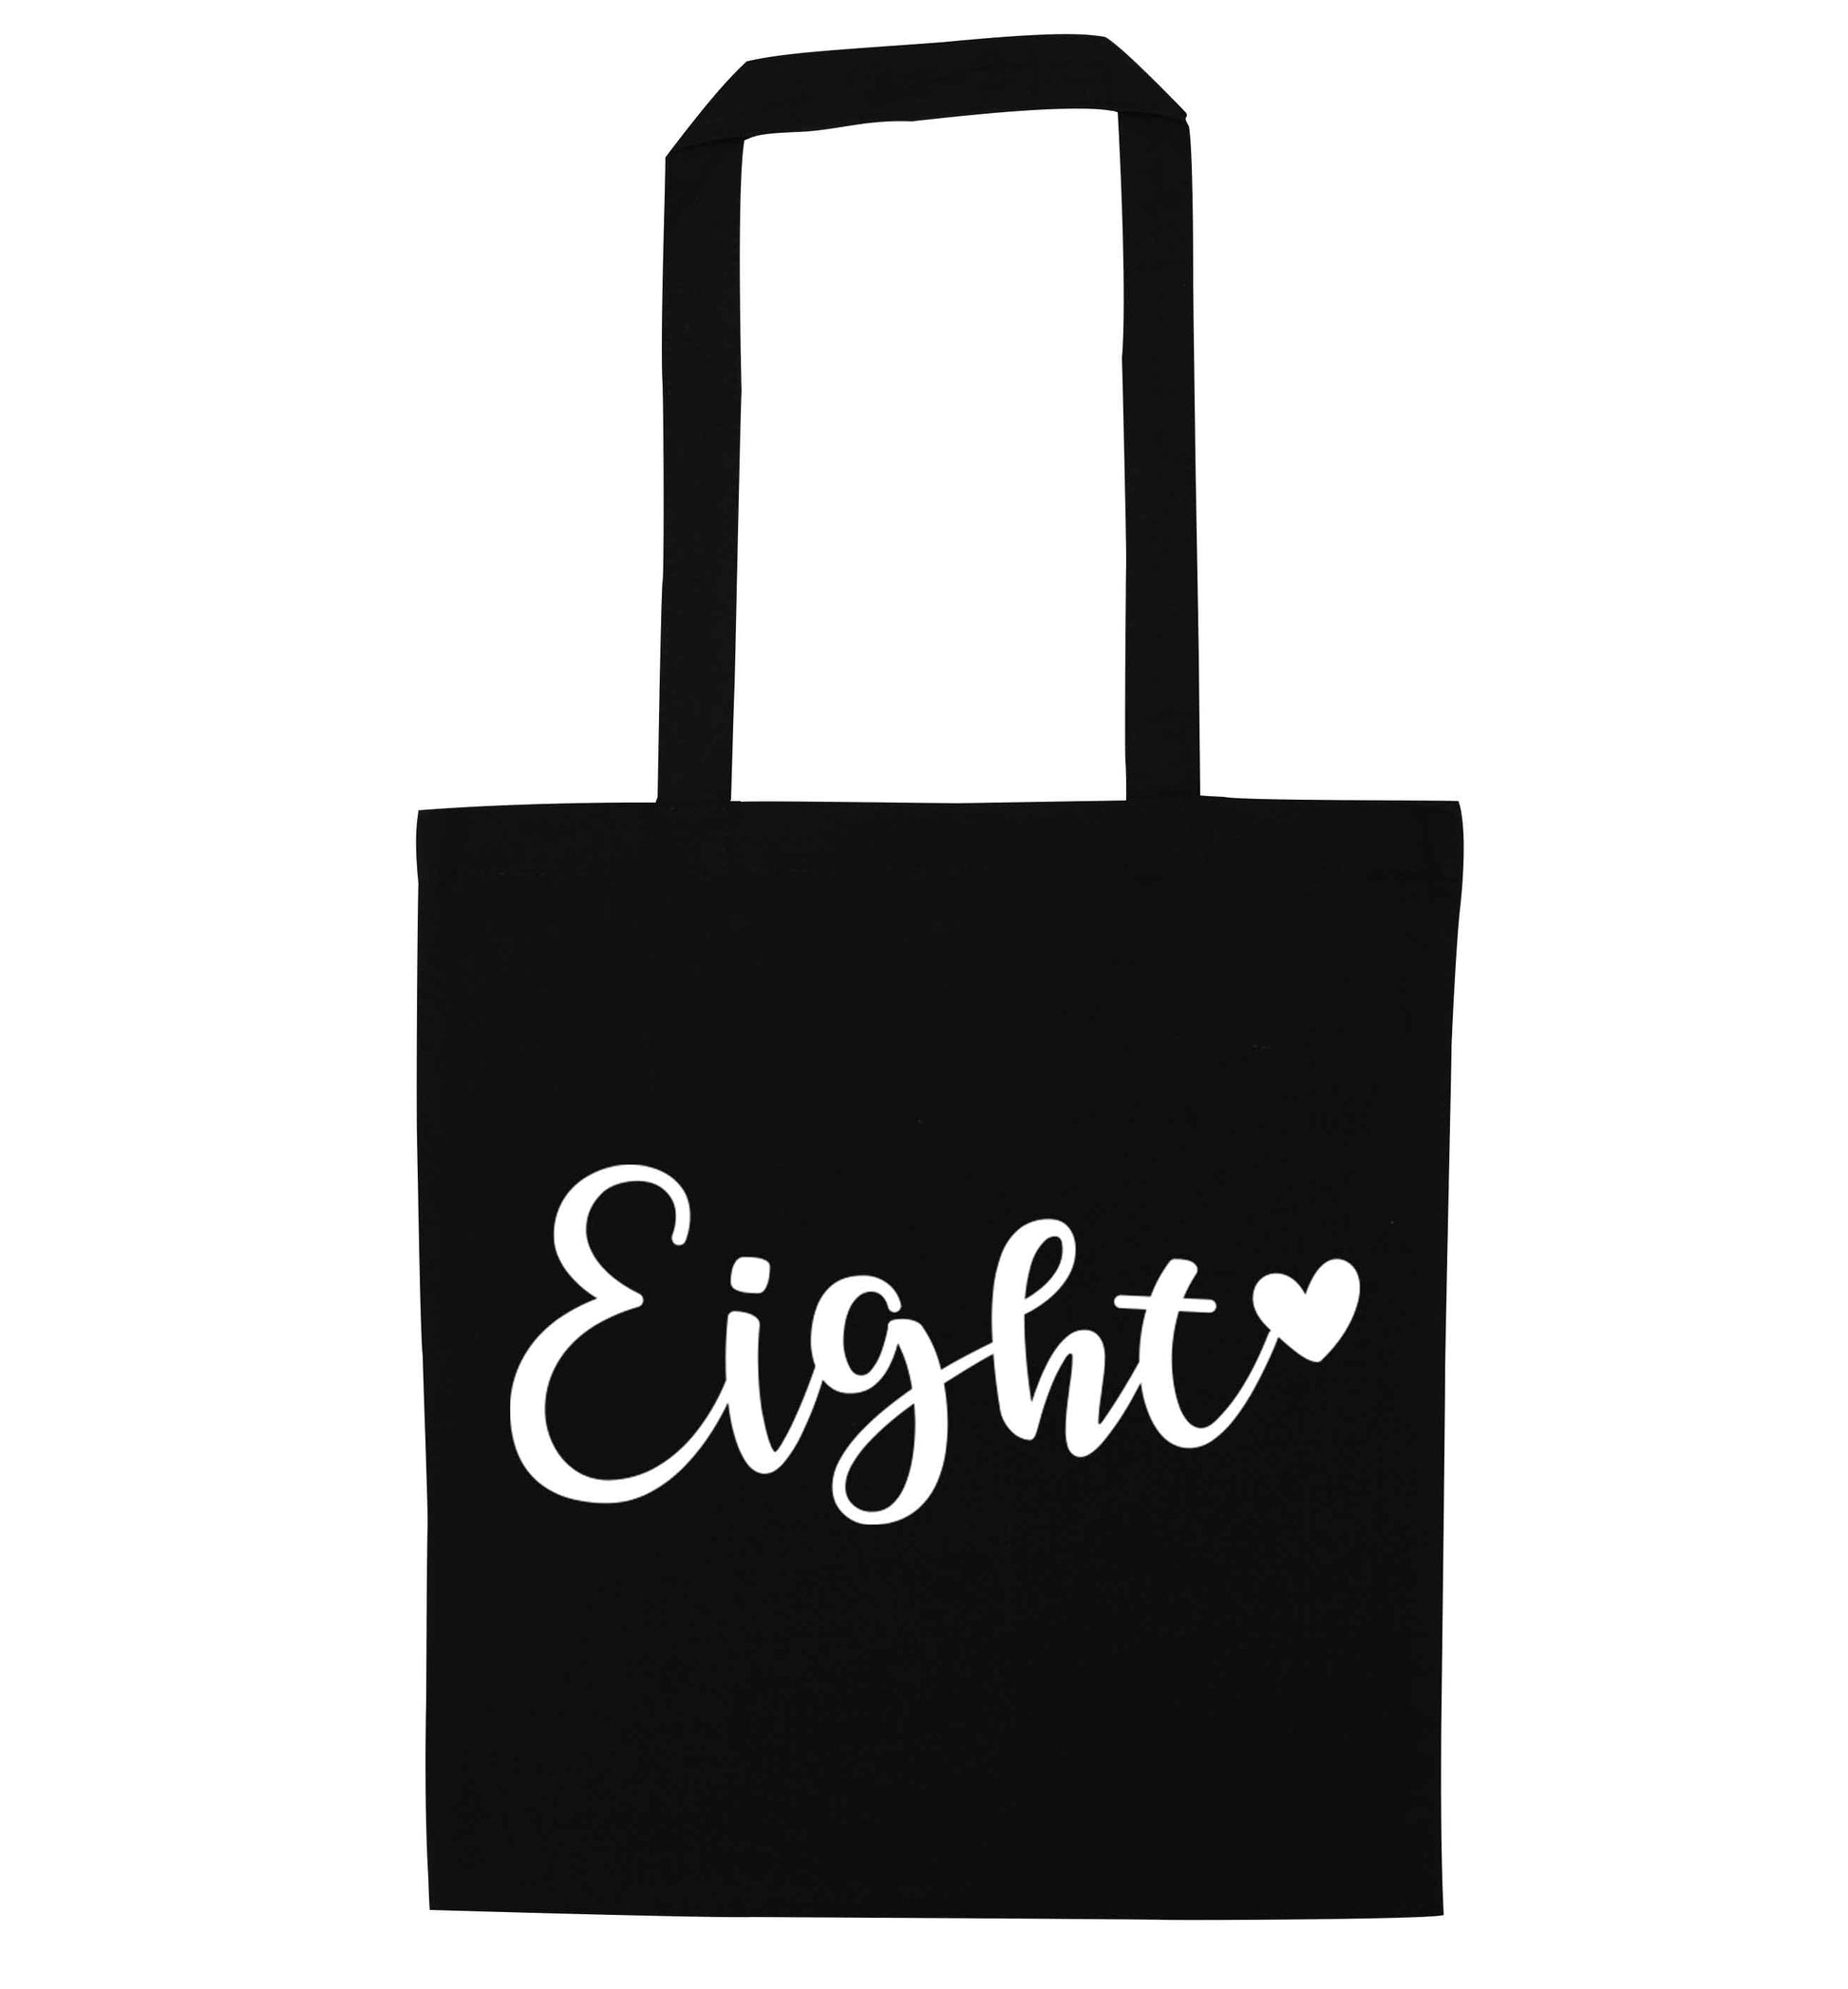 Eight and heart black tote bag